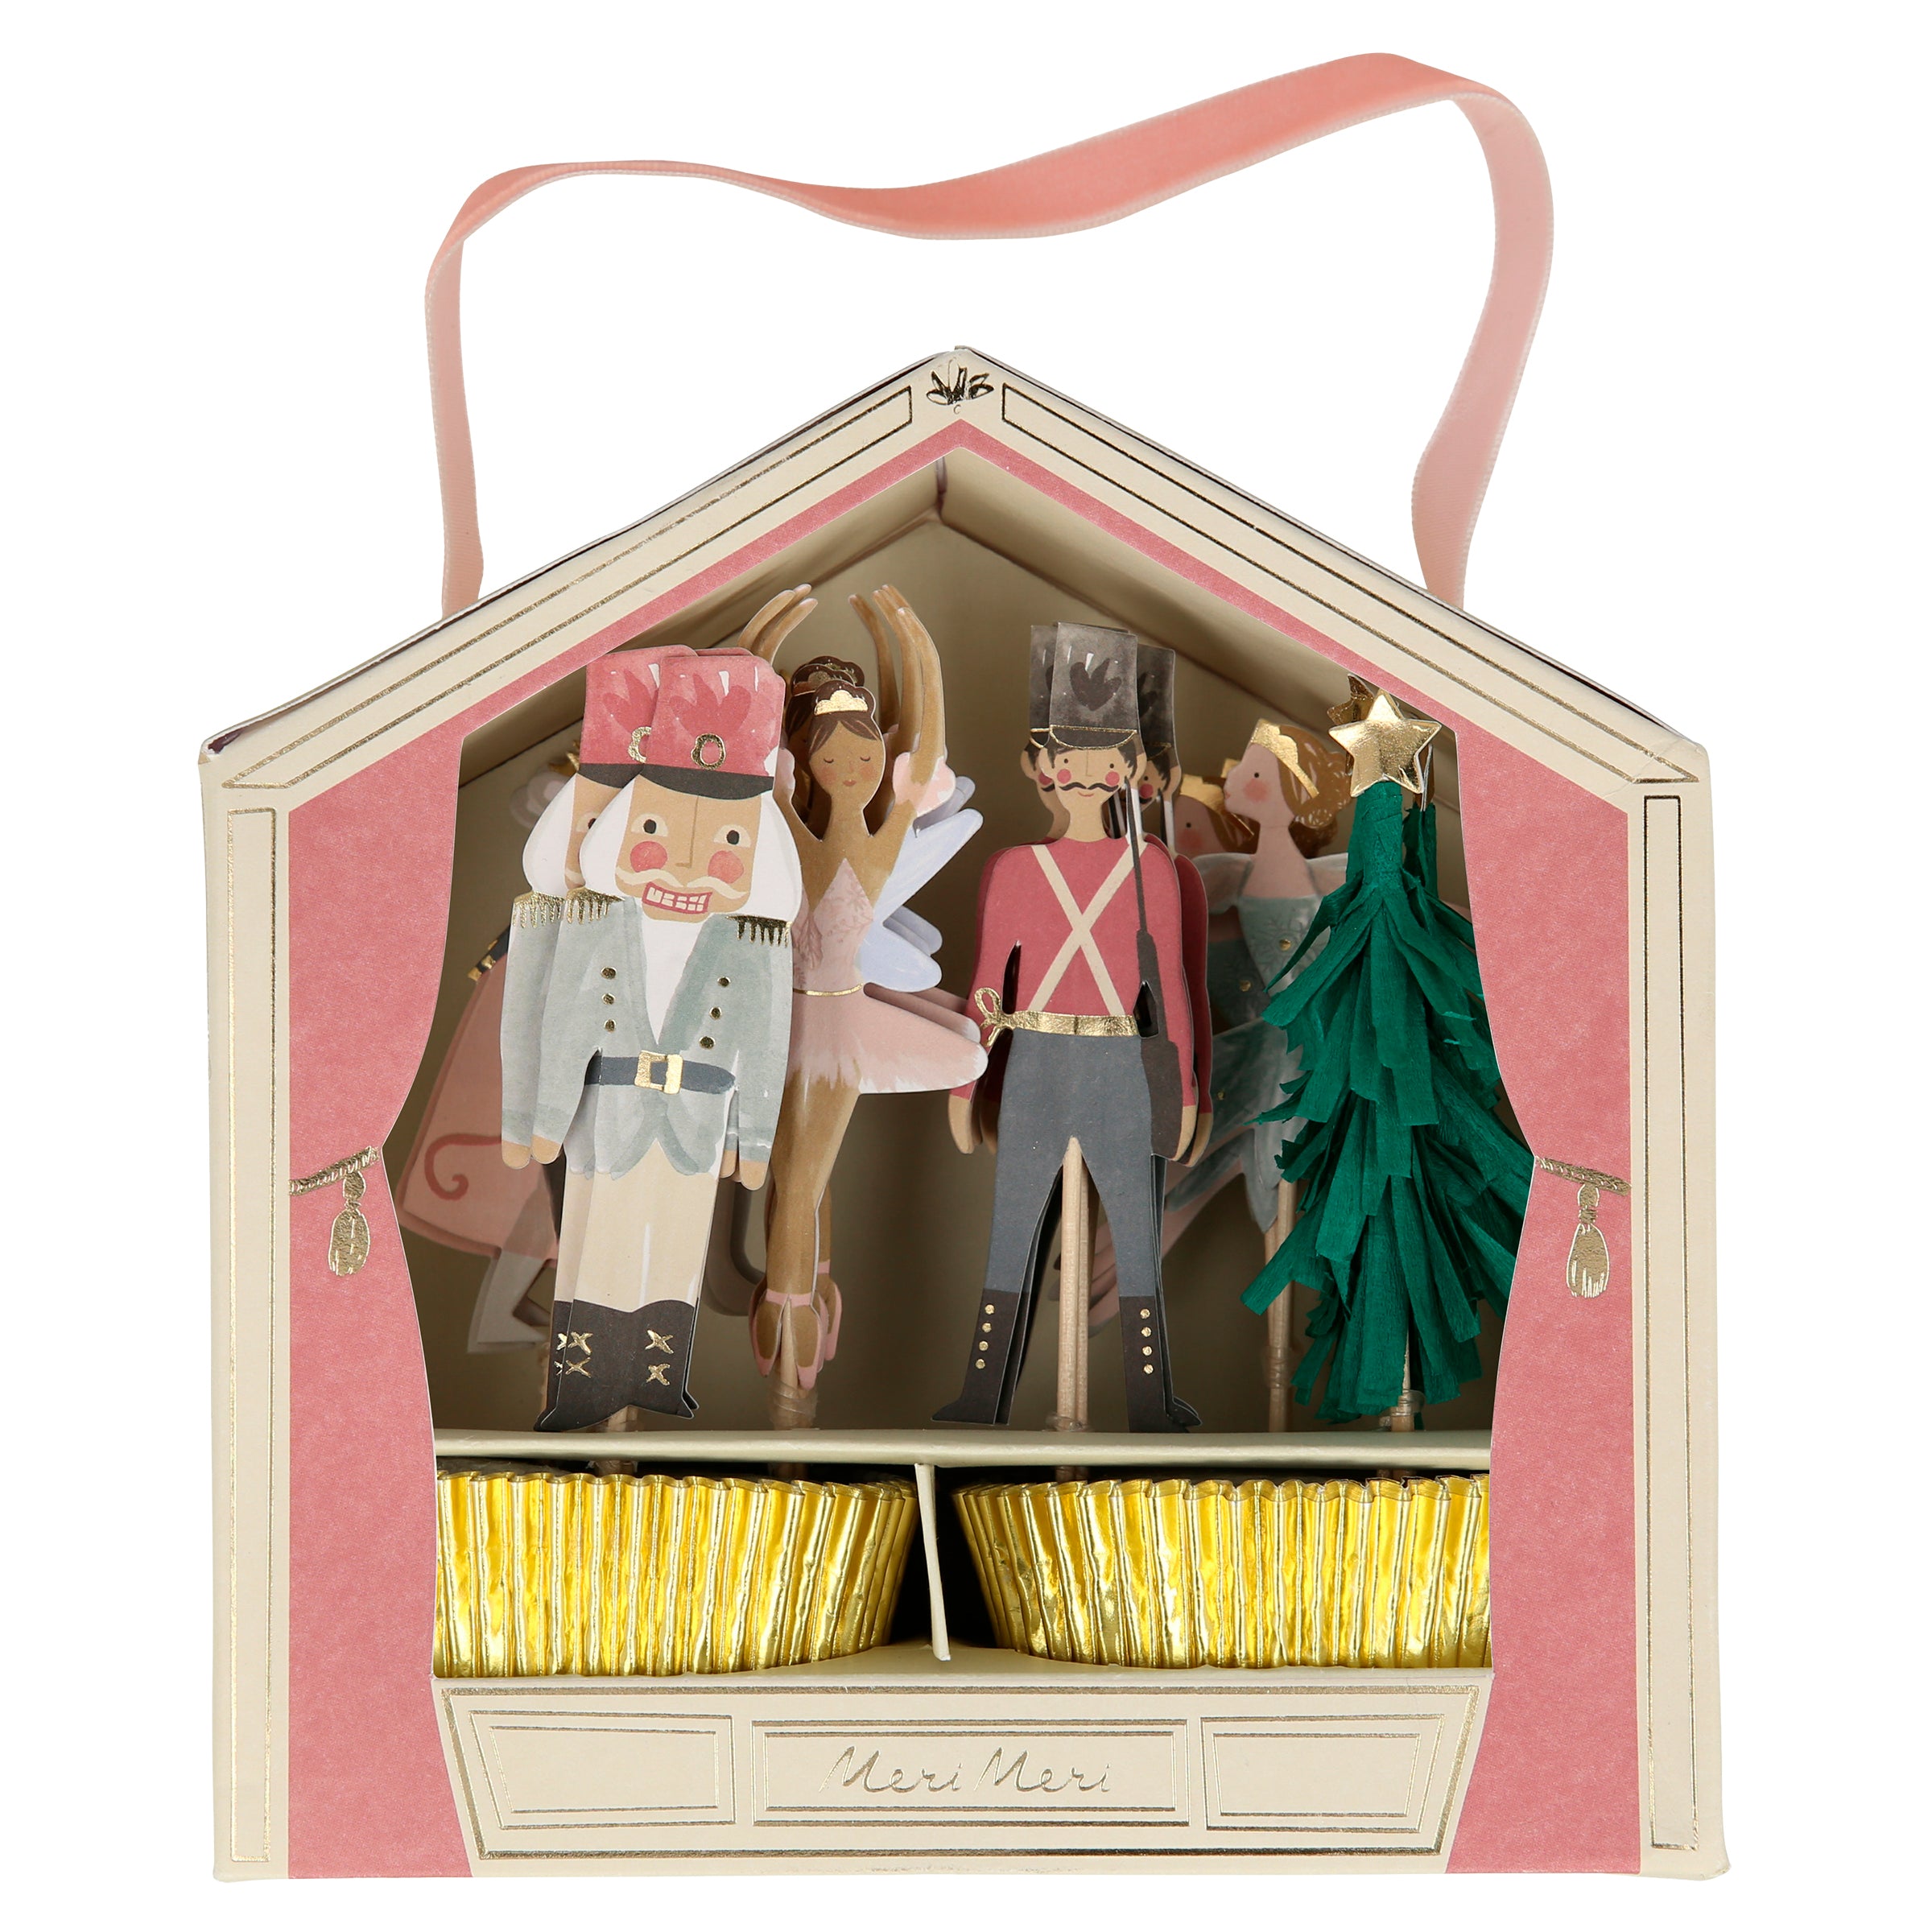 Make the most wonderful Christmas cupcakes with our special Nutcracker Christmas kit.